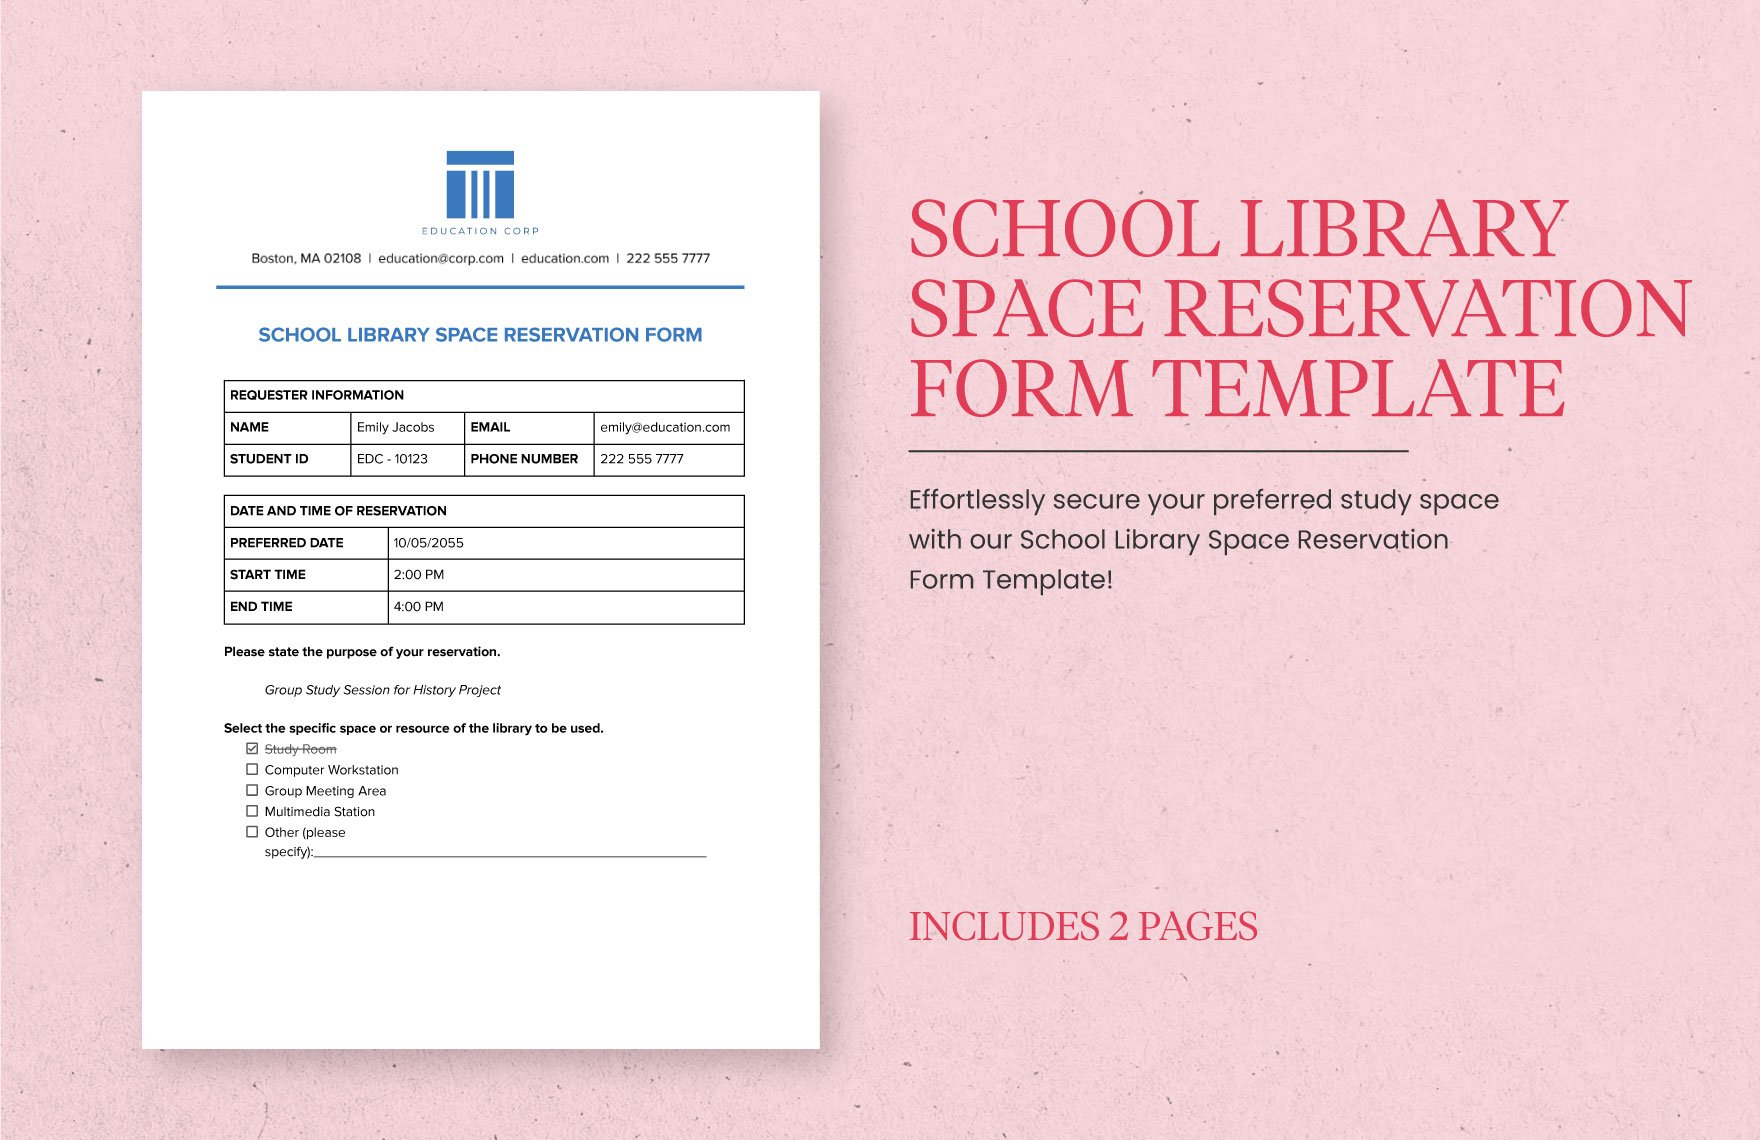 School Library Space Reservation Form Template in Word, Google Docs, PDF